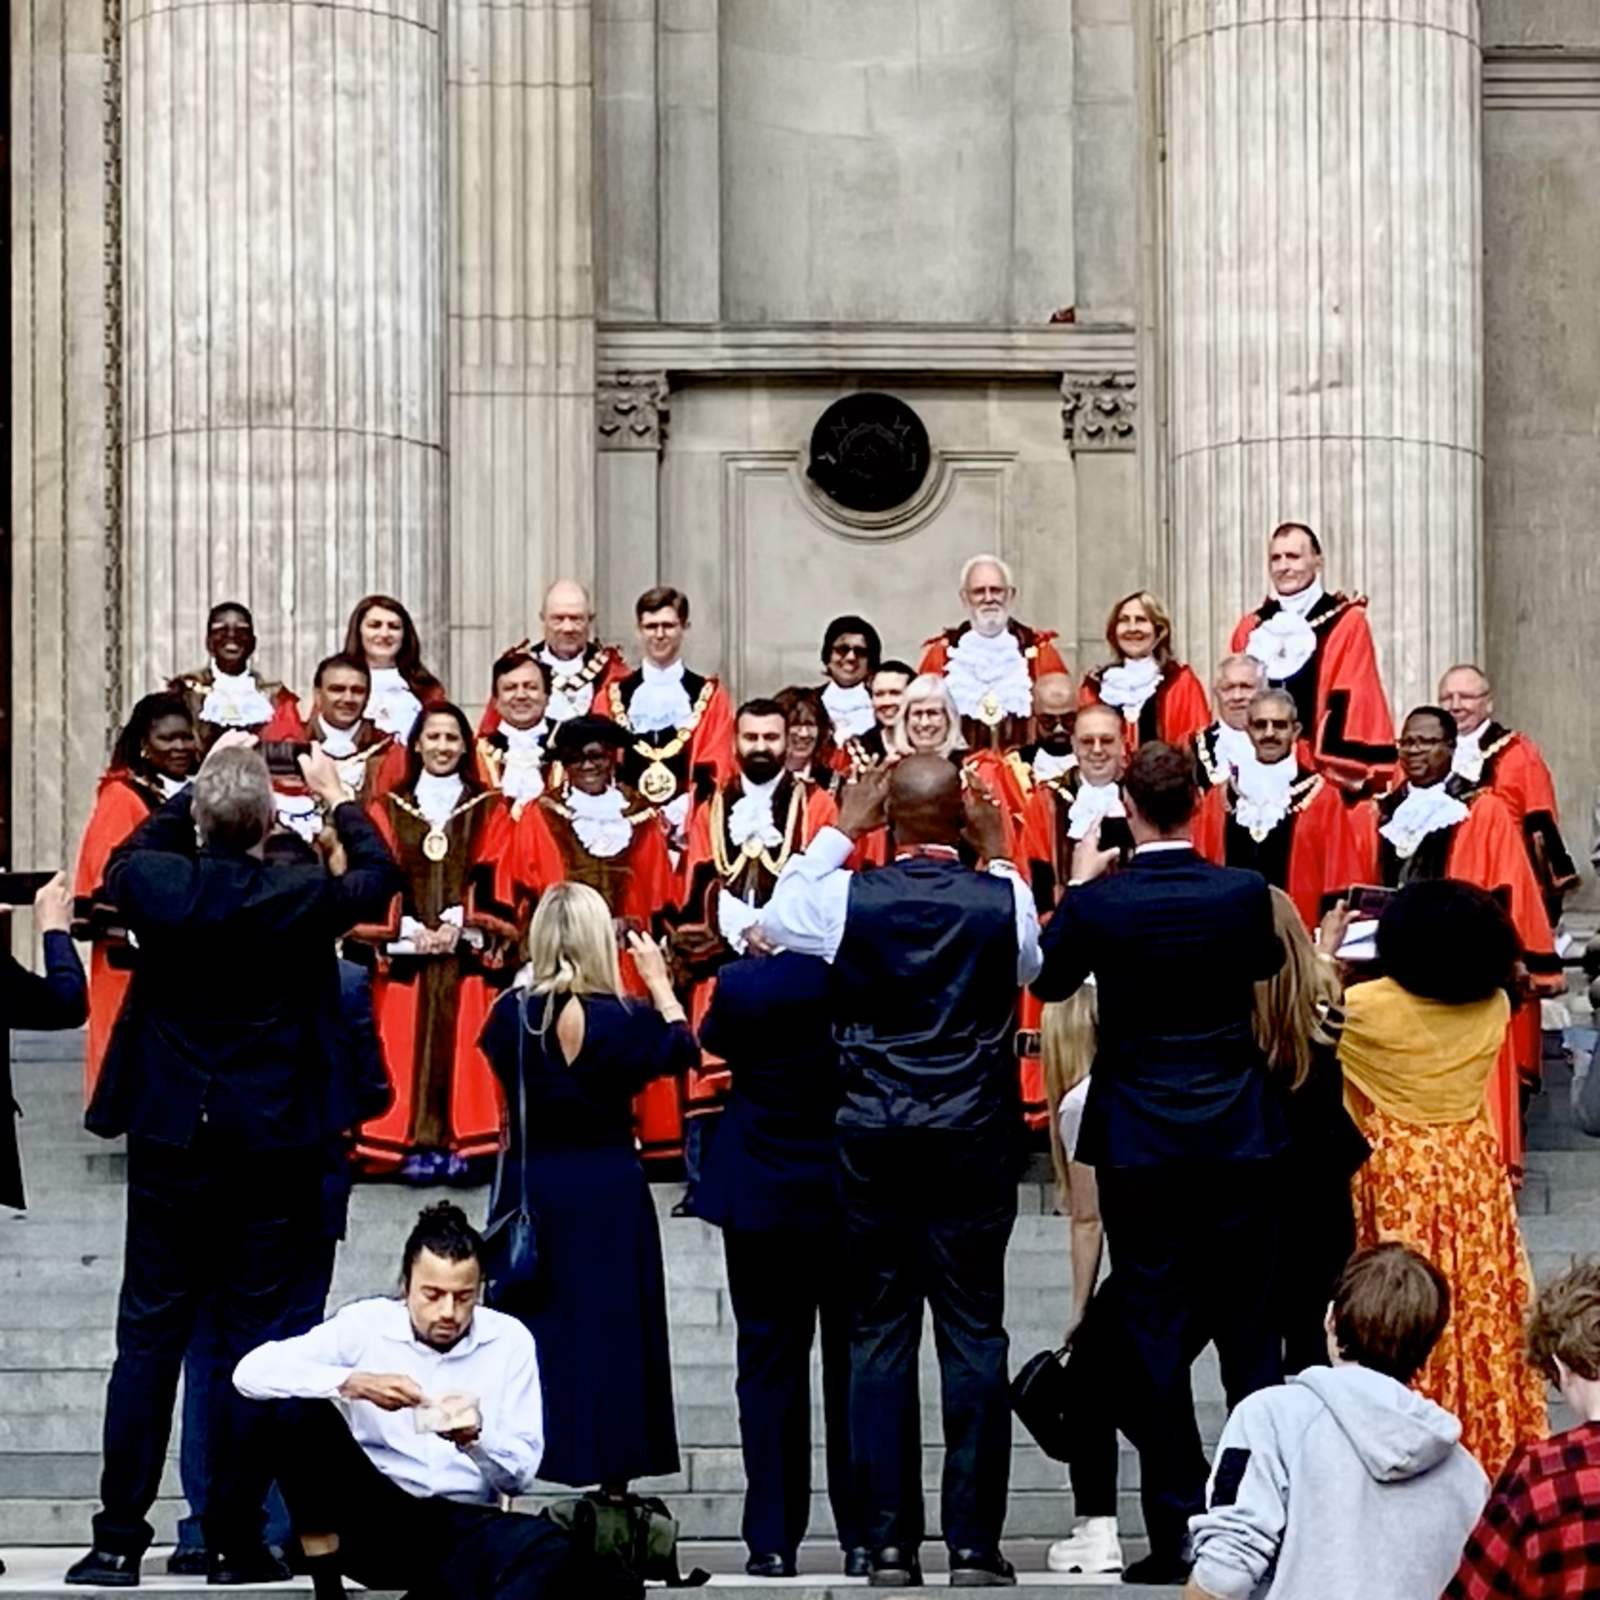 24 June 2023 - The Lord Mayor of London and The Sheriffs, The Lord Mayor of Westminster and the Mayors of the London Boroughs gathered for Evensong at St Paul’s Cathedral. Certainly caused a stir amongst the photographers and some passing tourists.